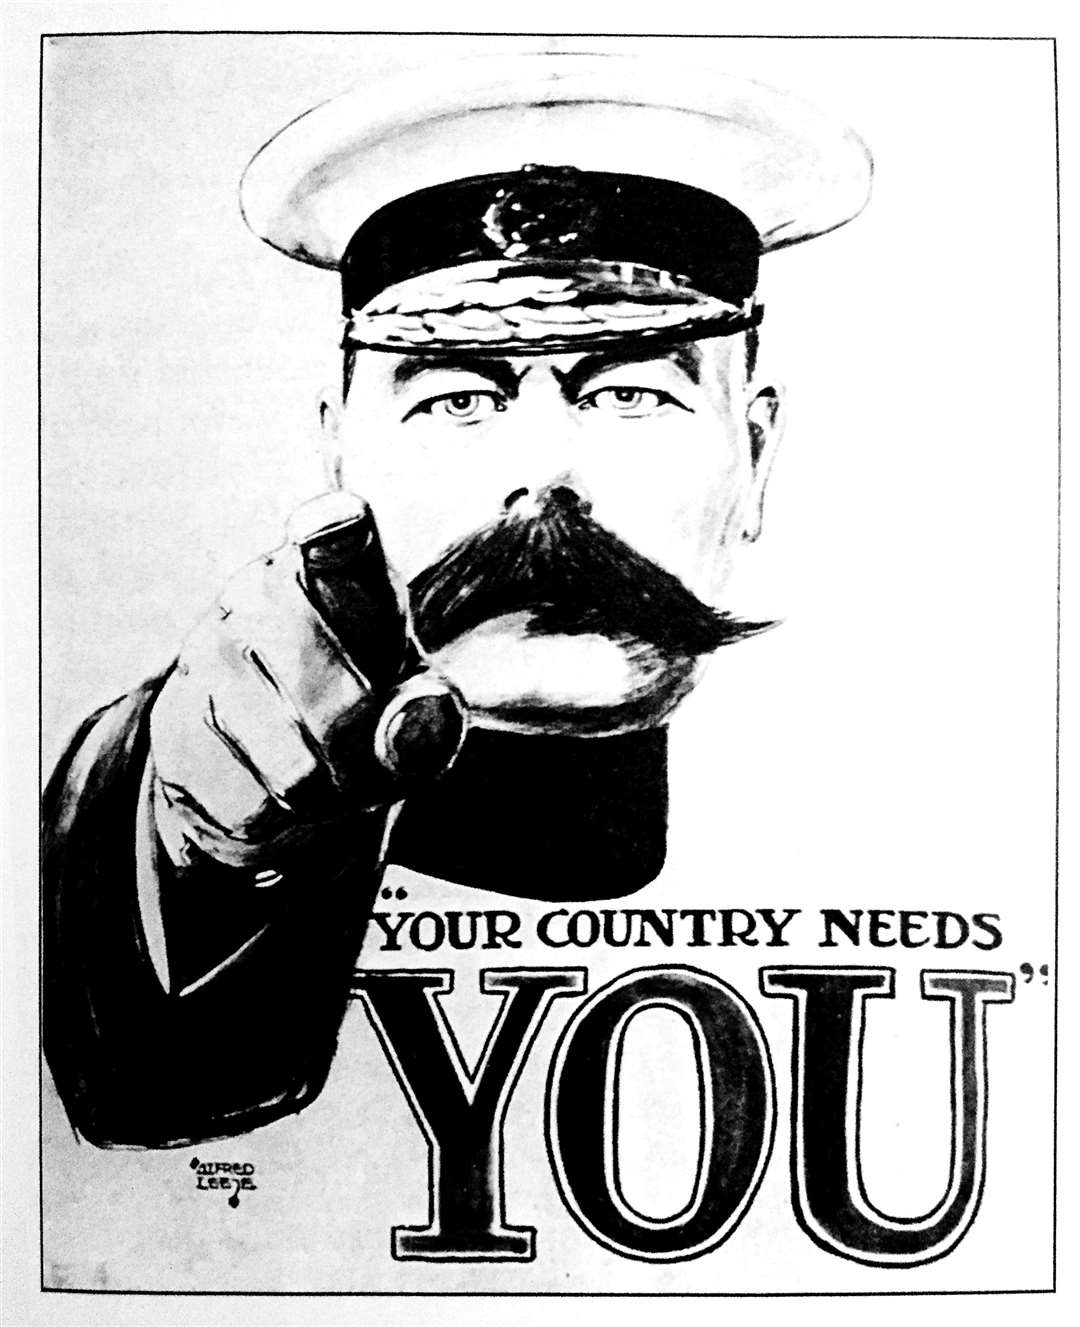 The famous recruitment poster with Lord Kitchener